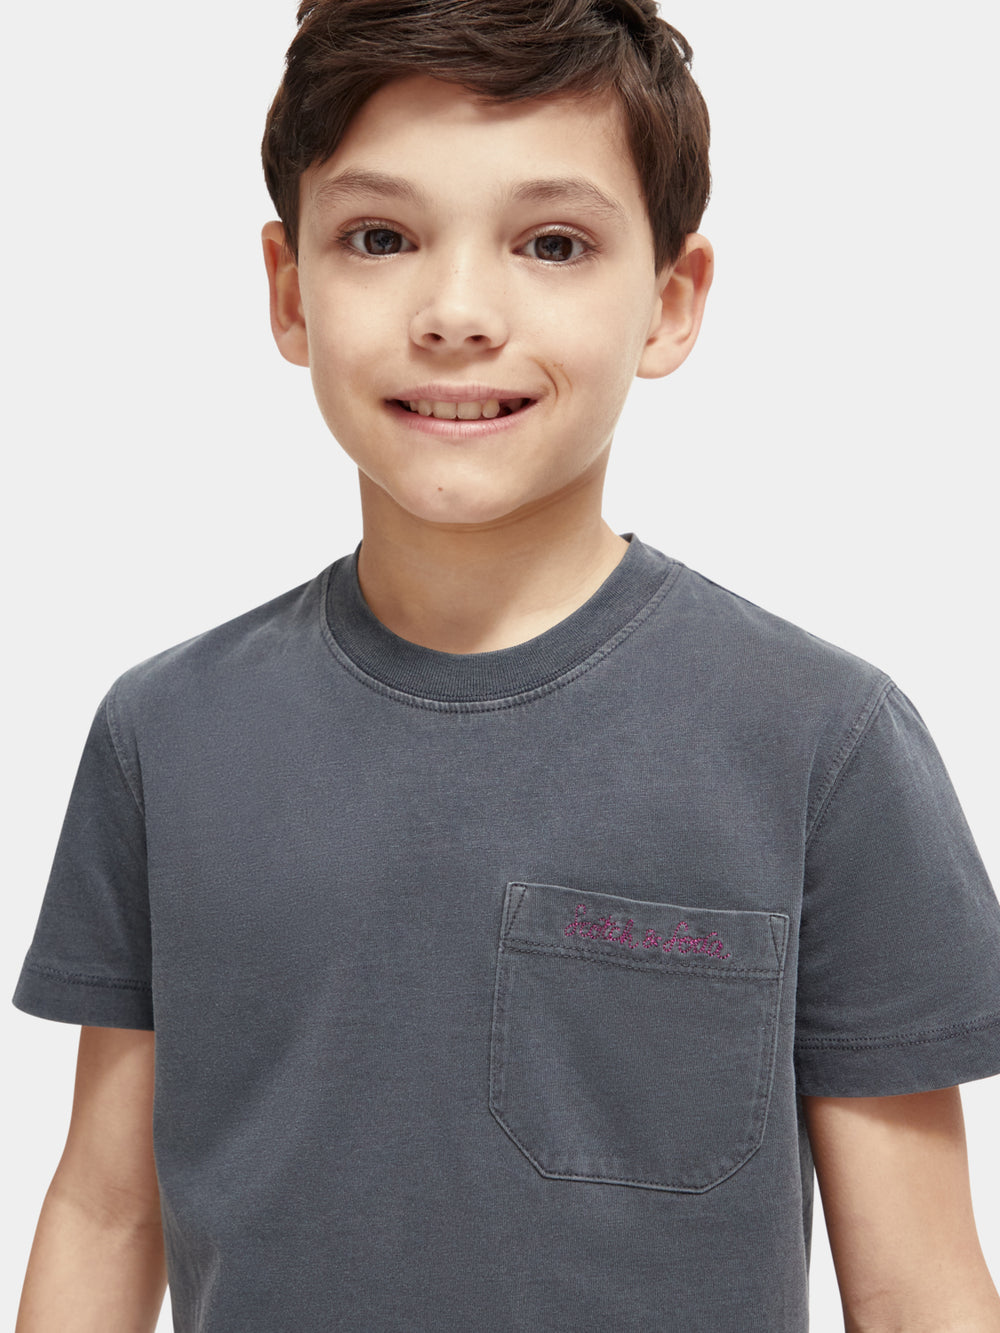 Kids - Relaxed-fit chest pocket t-shirt - Scotch & Soda AU